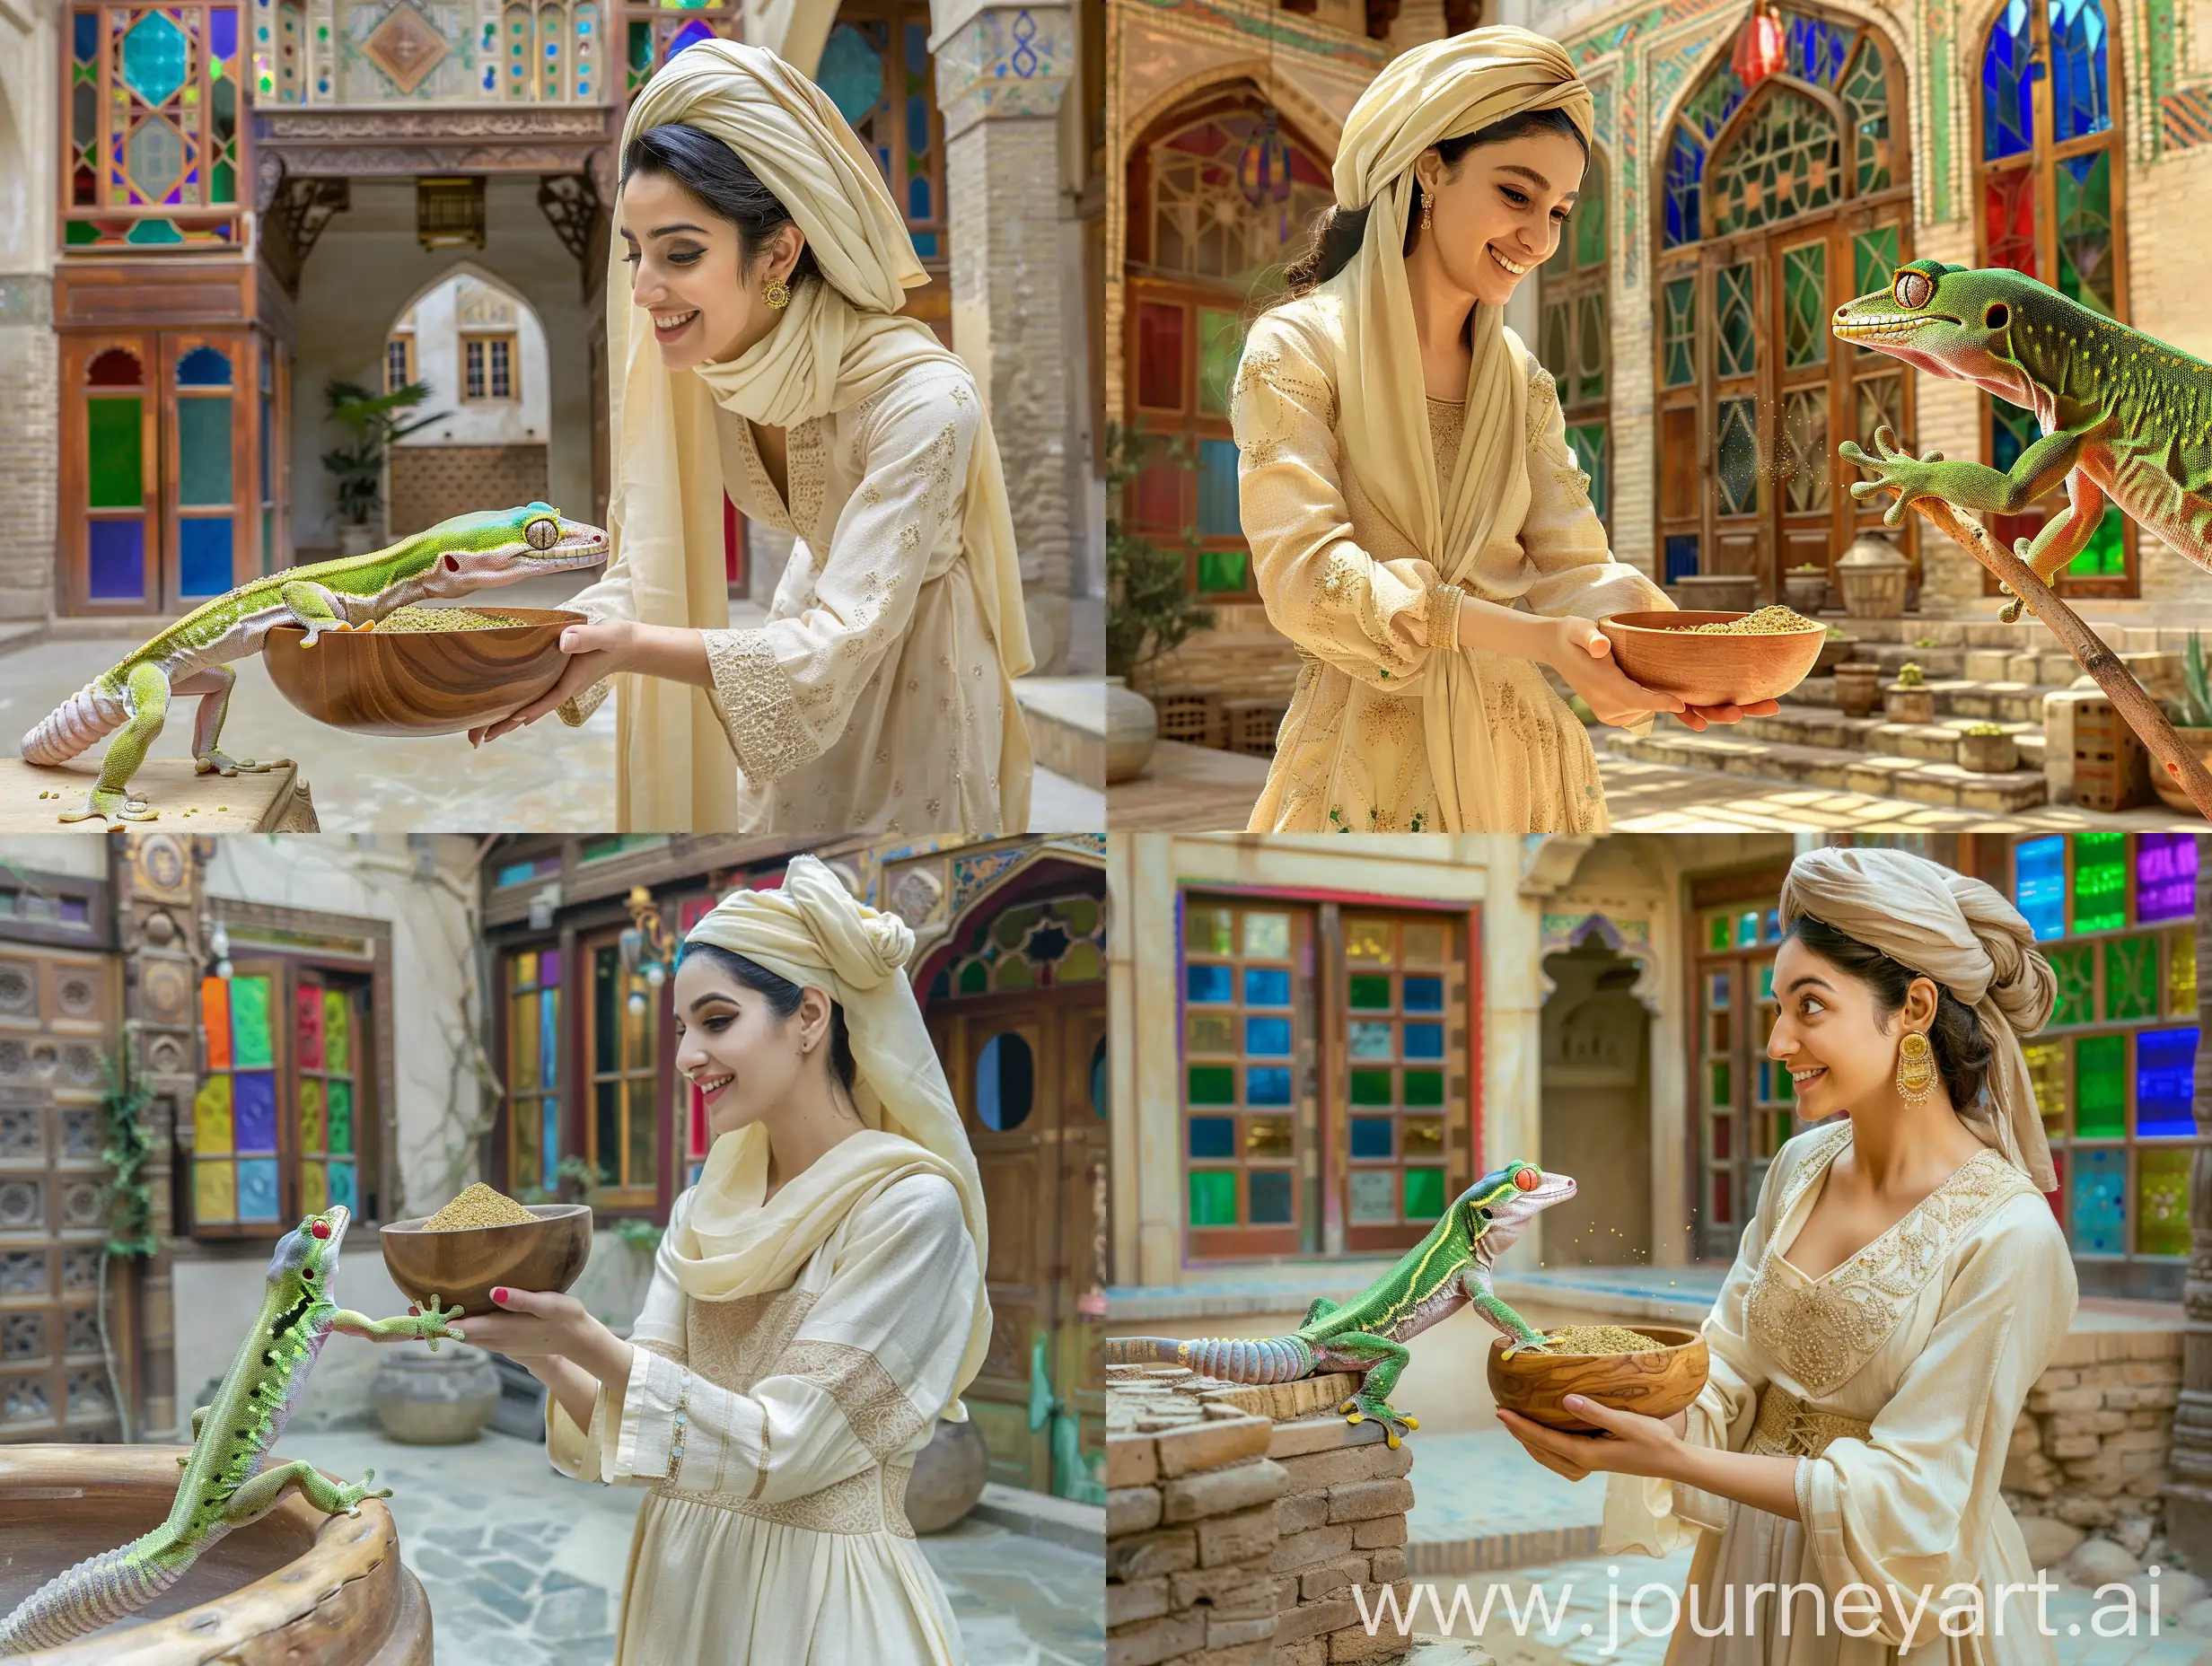 Persian-Woman-Offering-Pistachio-Powder-to-Giant-Green-Gecko-in-Traditional-Courtyard-Scene